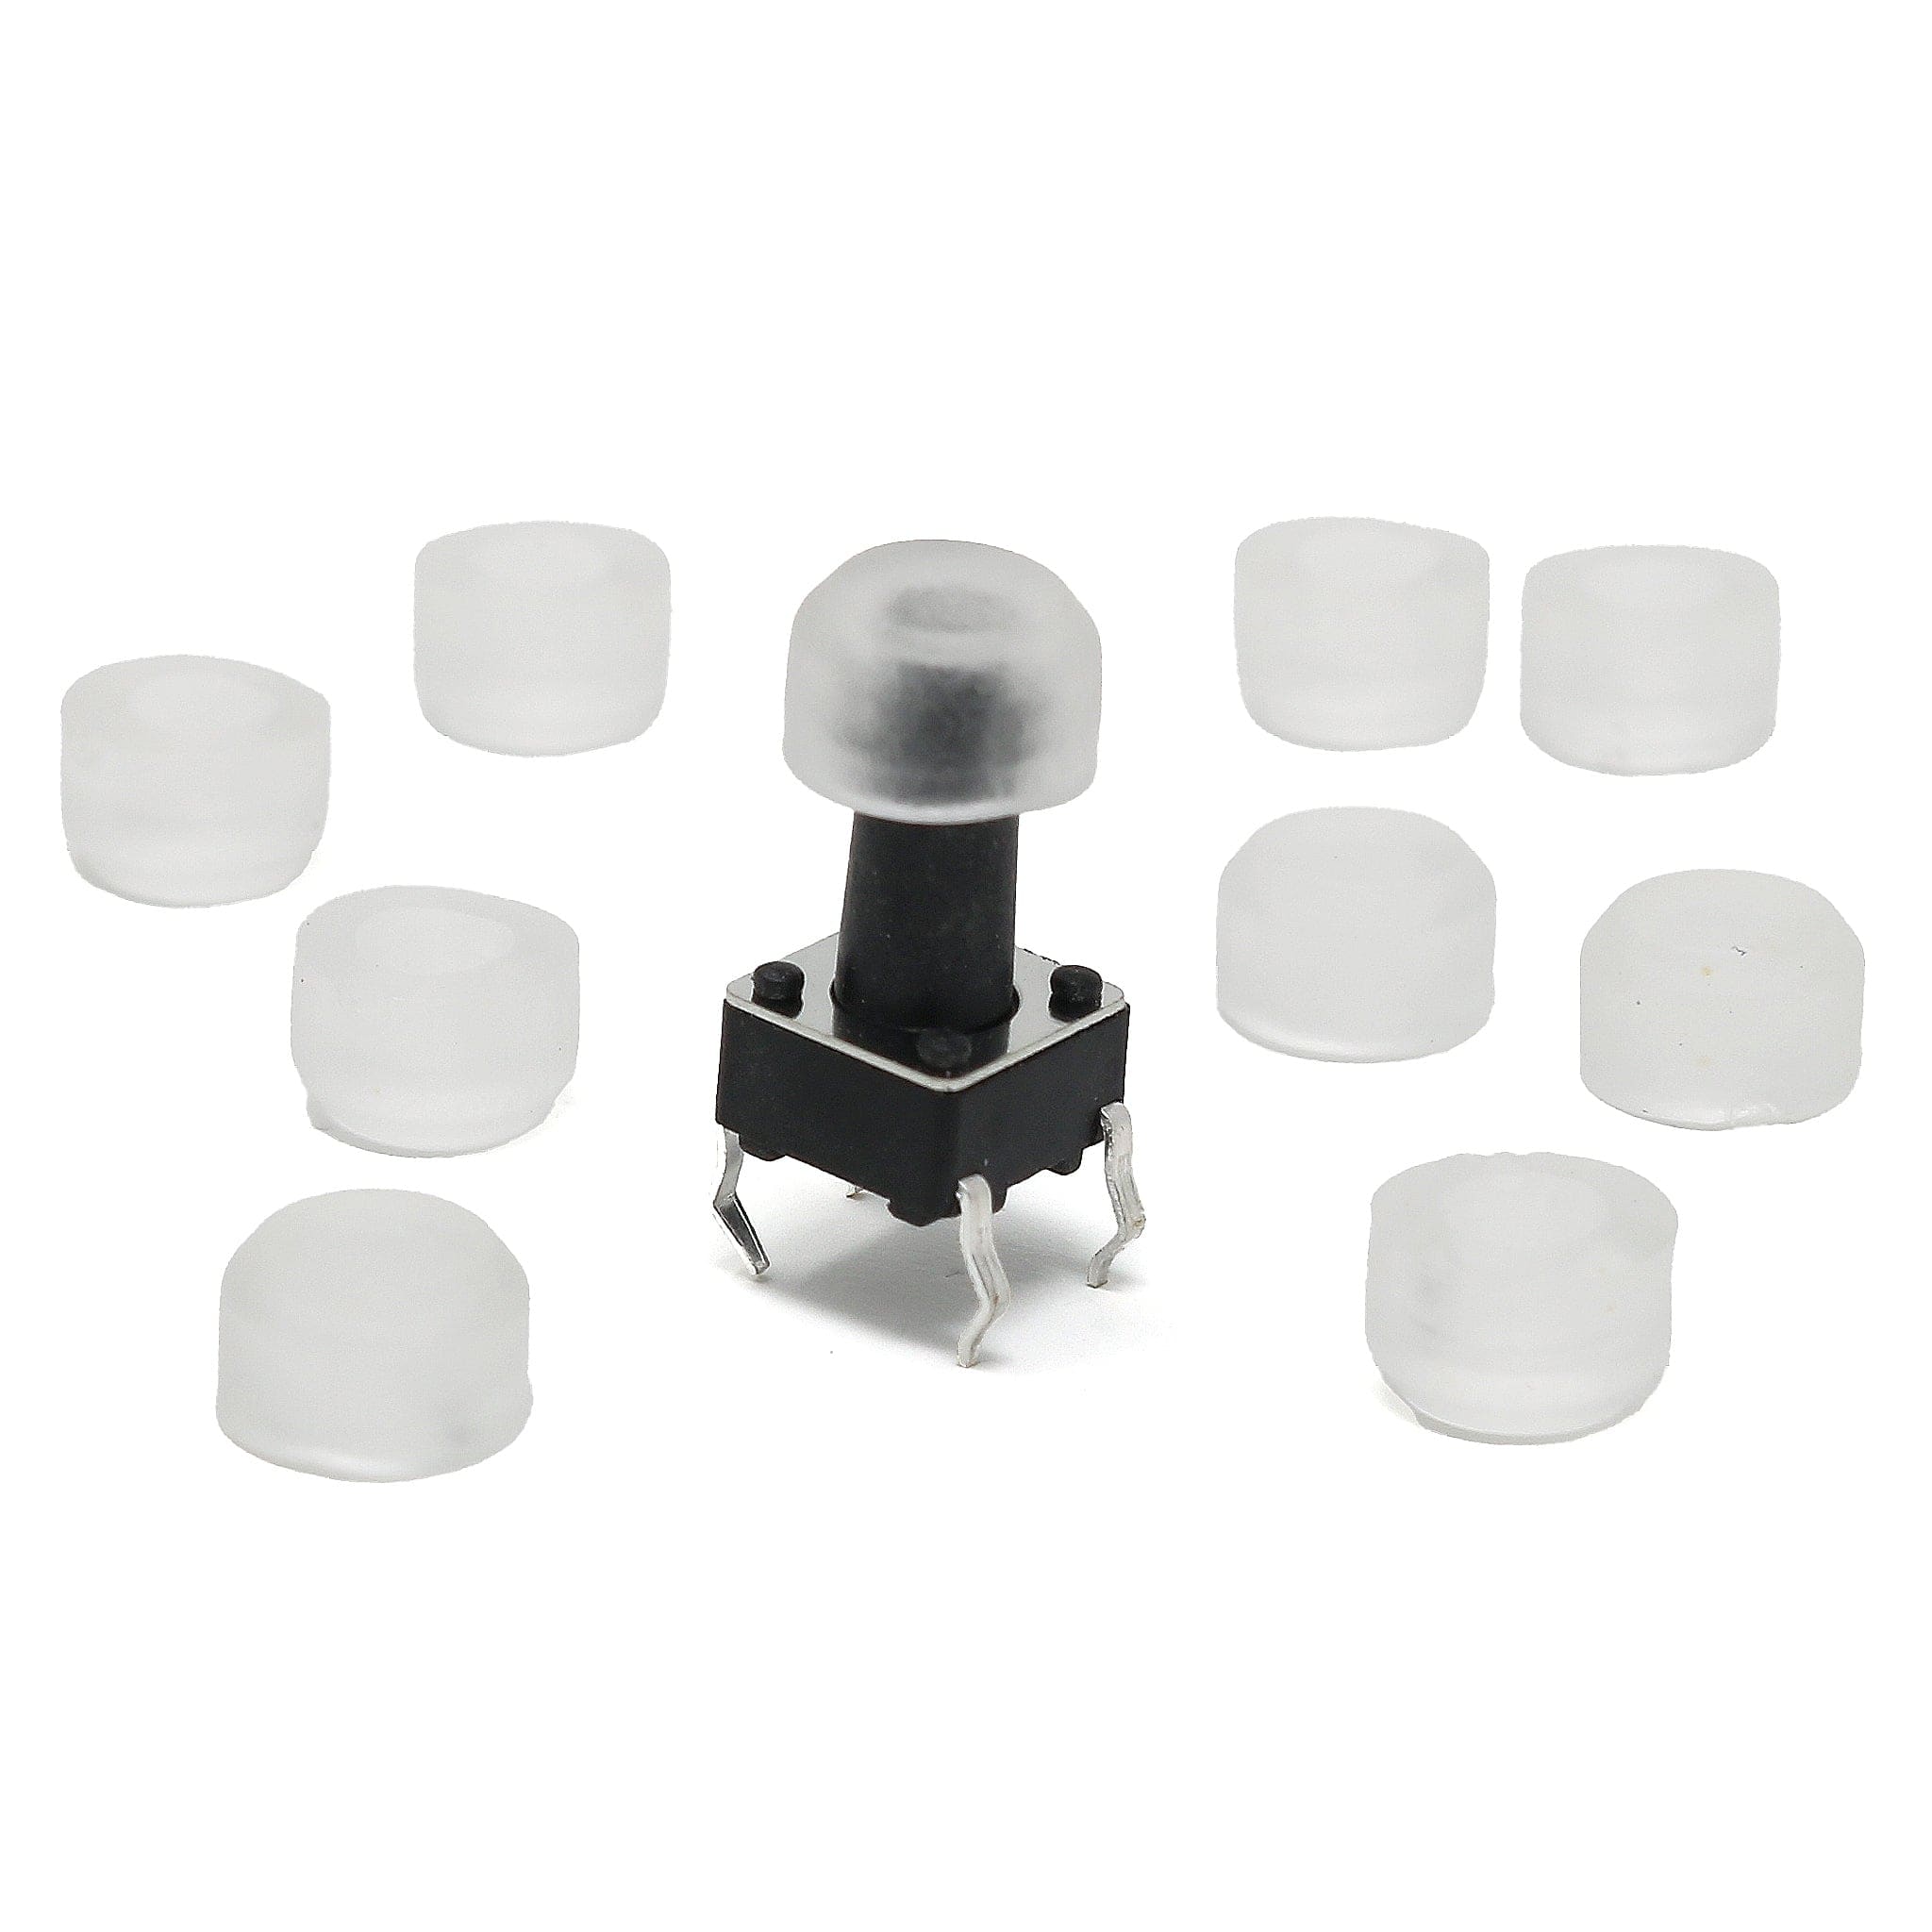 Clear Soft Caps for Tactile Buttons (10-pack) - The Pi Hut